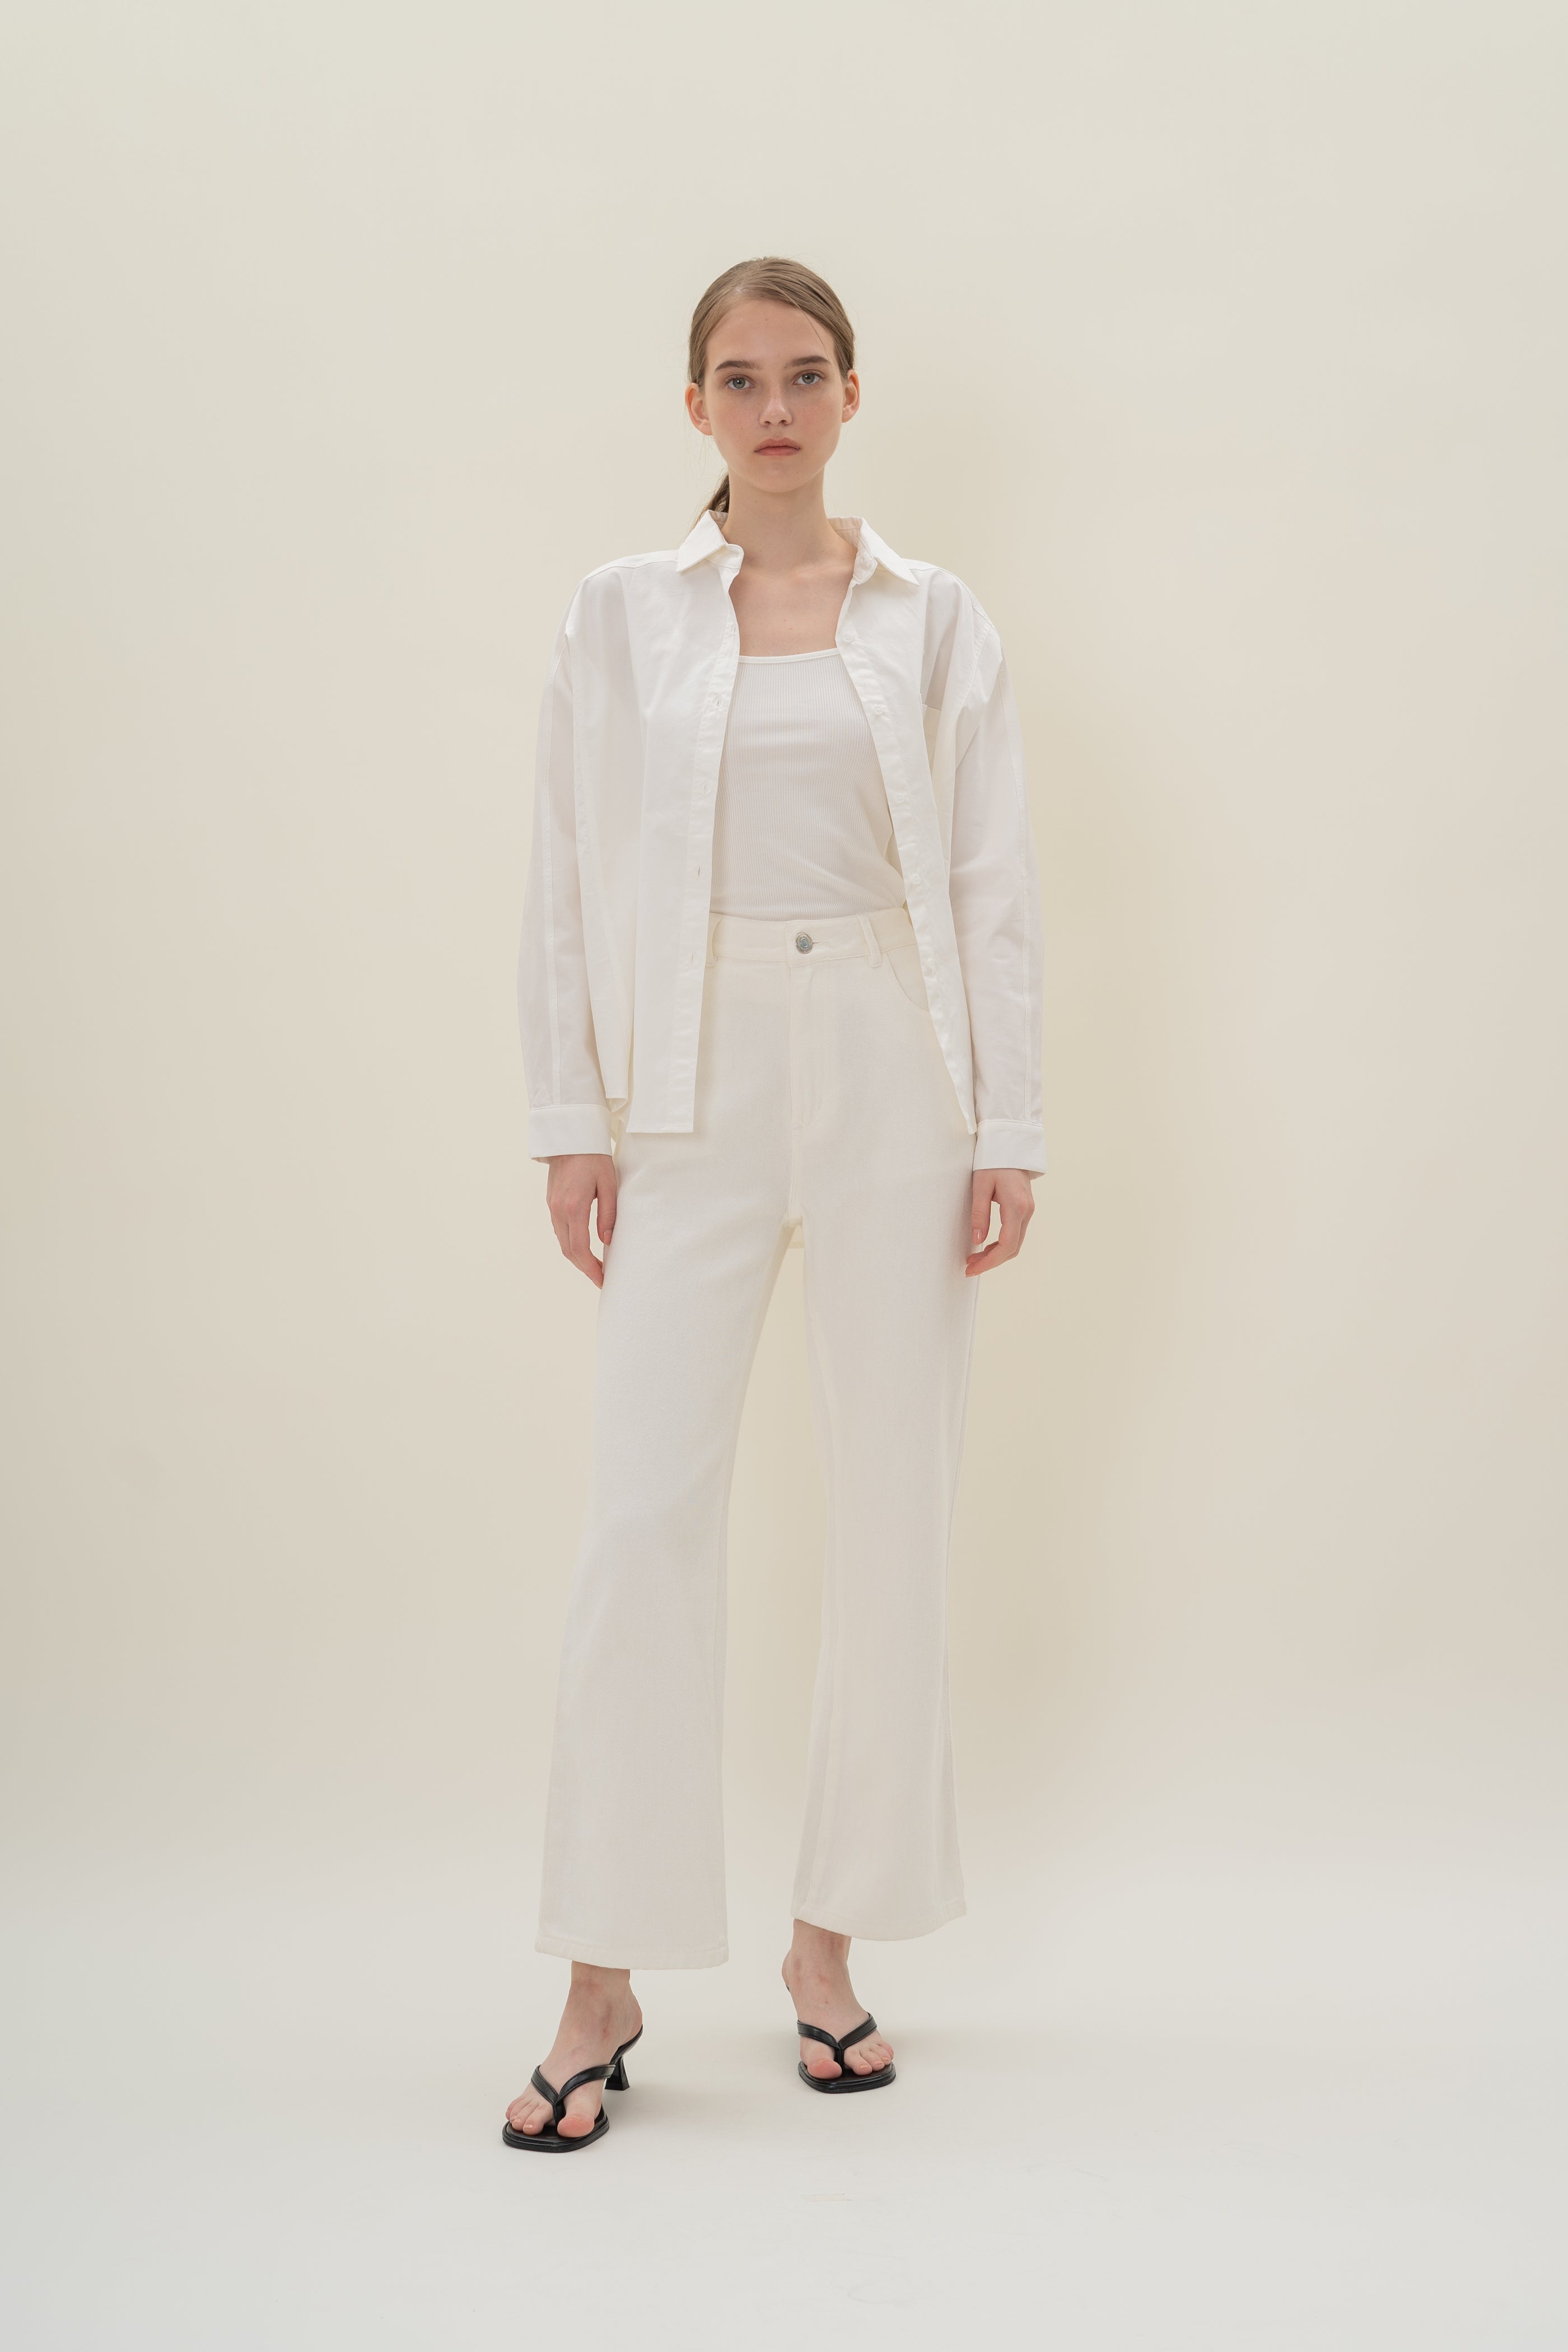 Studios Shirt with Seam Detailing in White